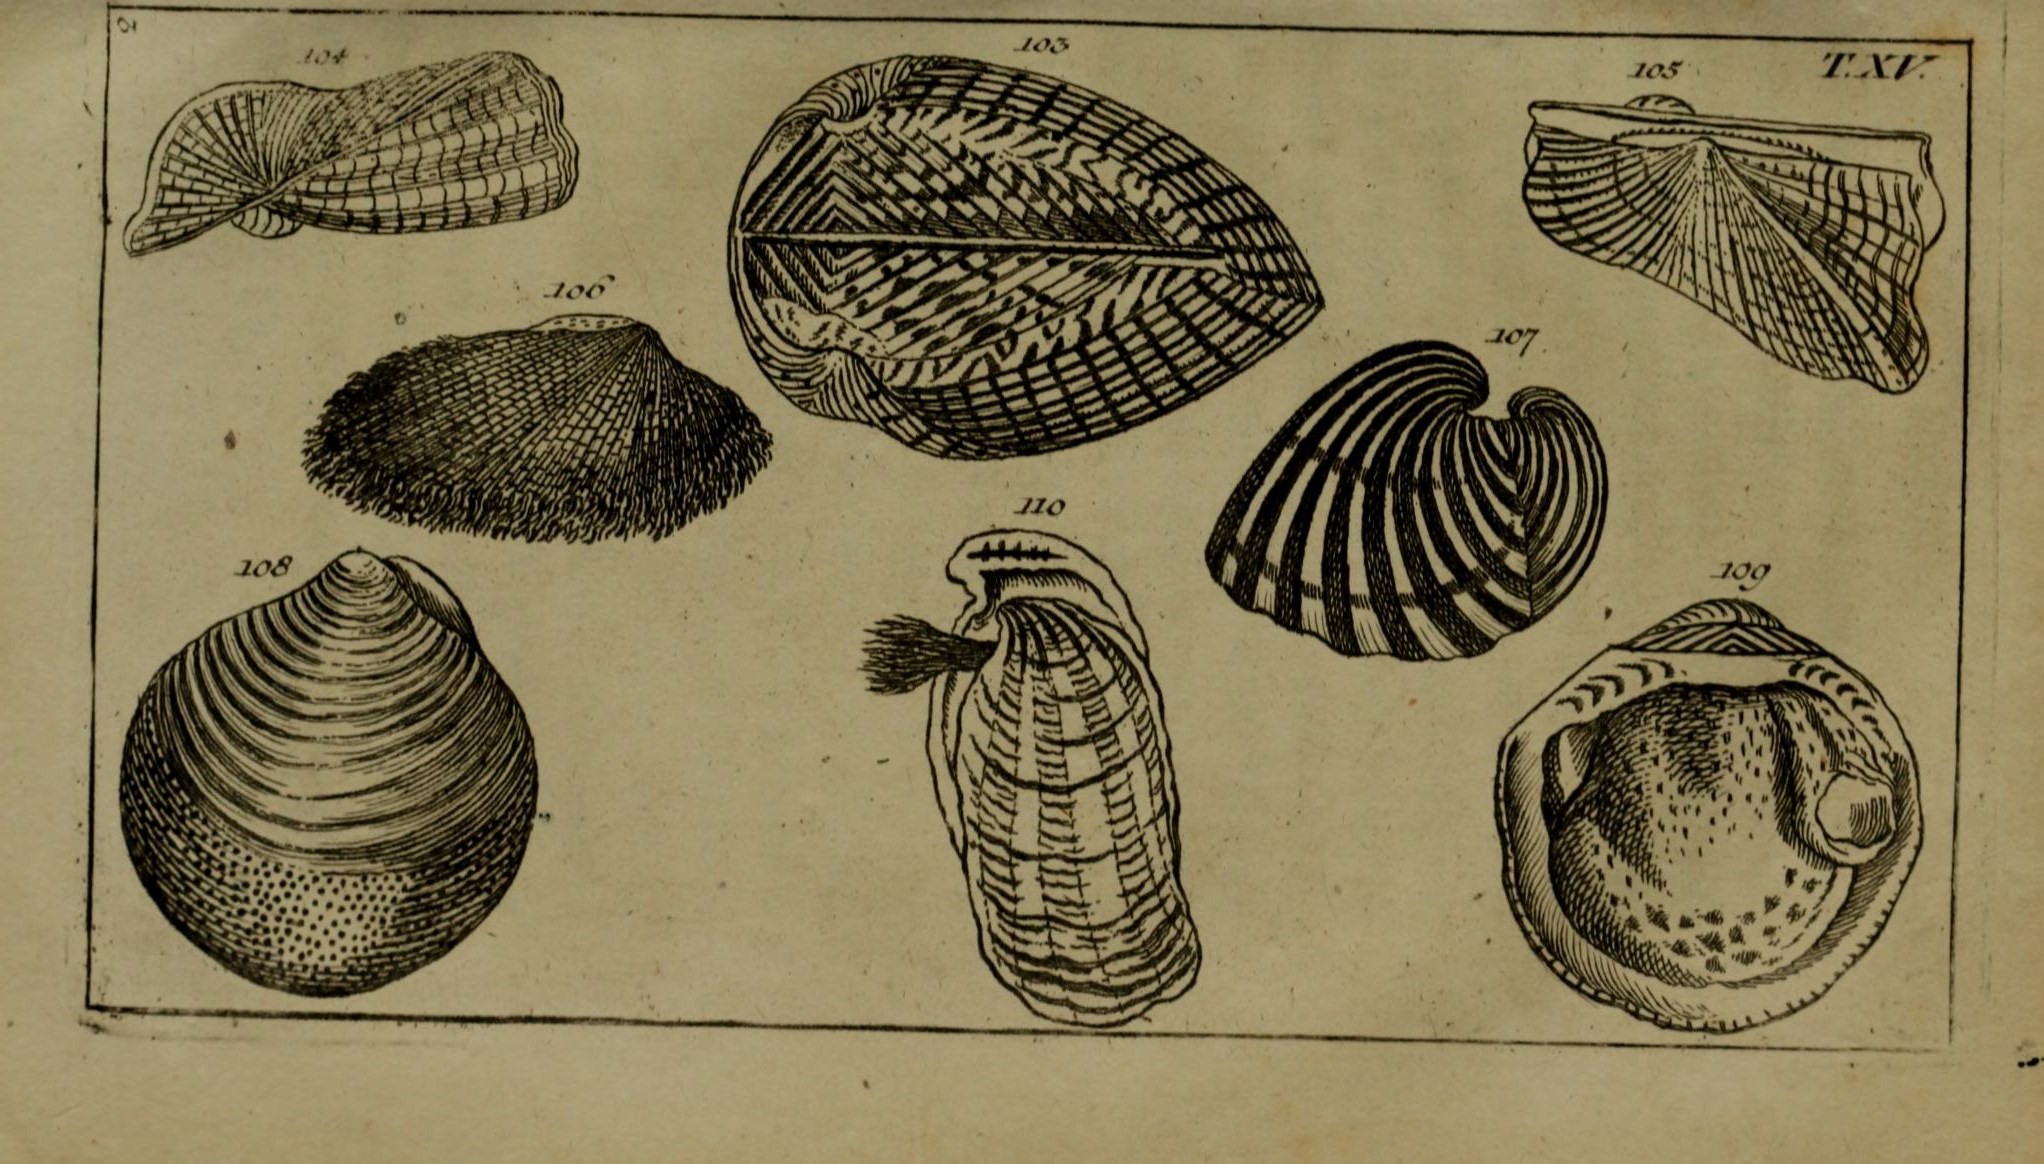 this illustration depicts shells in different stages of growth